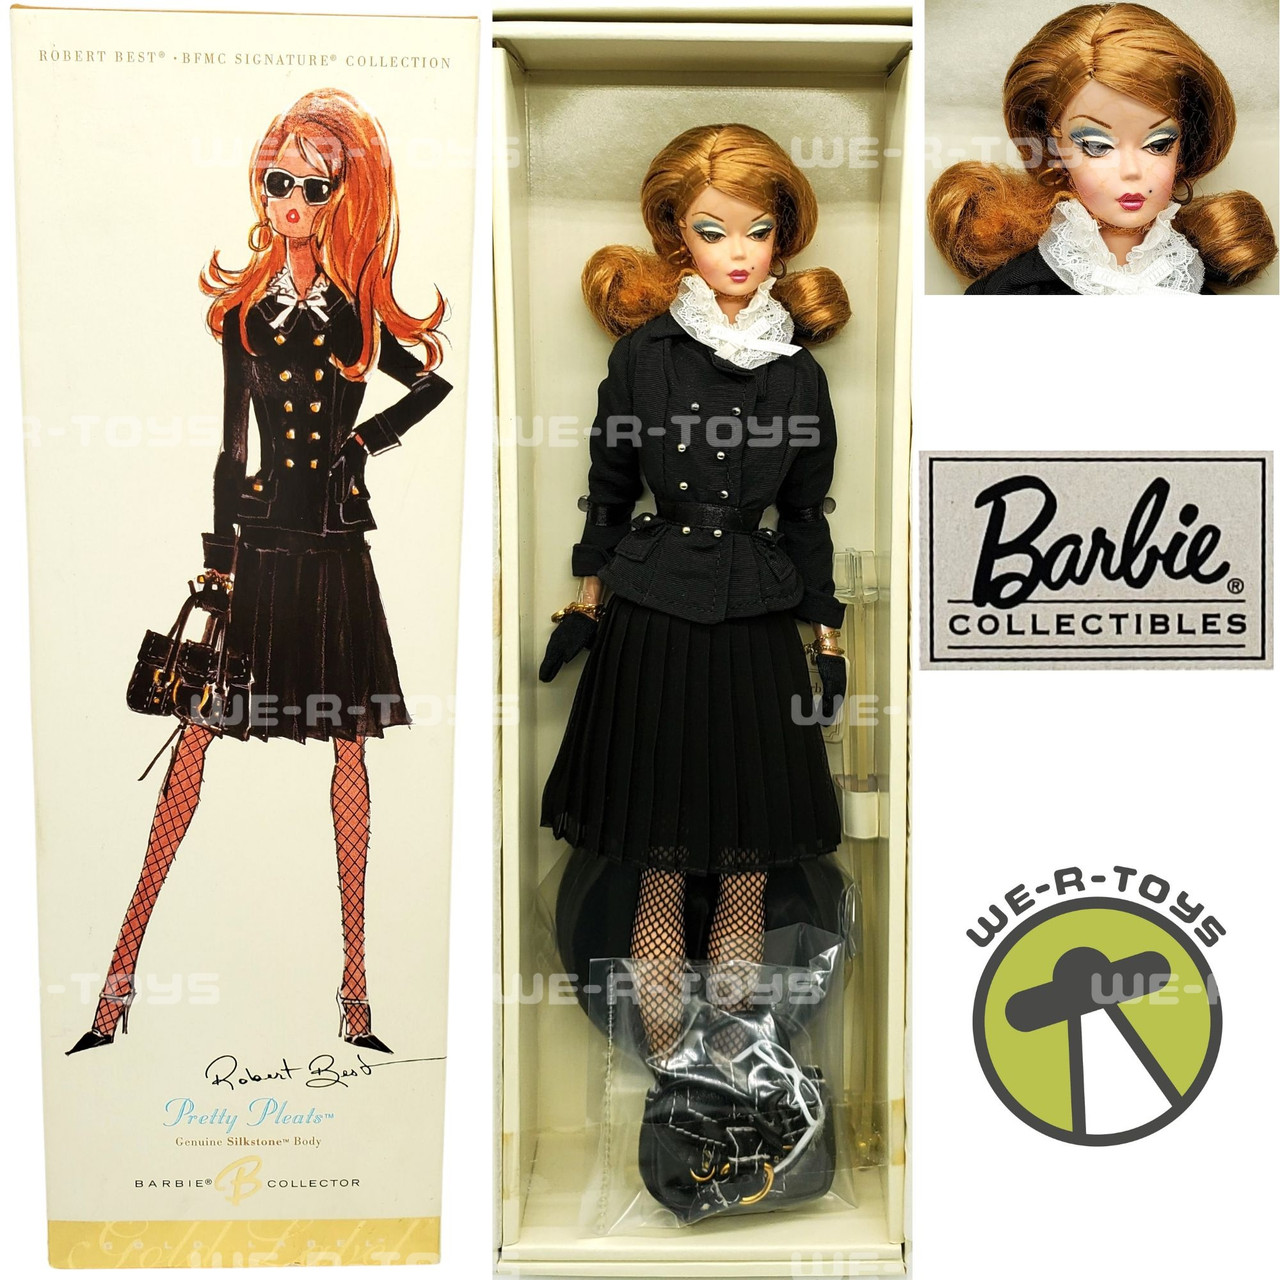 Pretty Pleats Barbie Doll Robert Best BFMC Signature Collection Gold Label  J0956